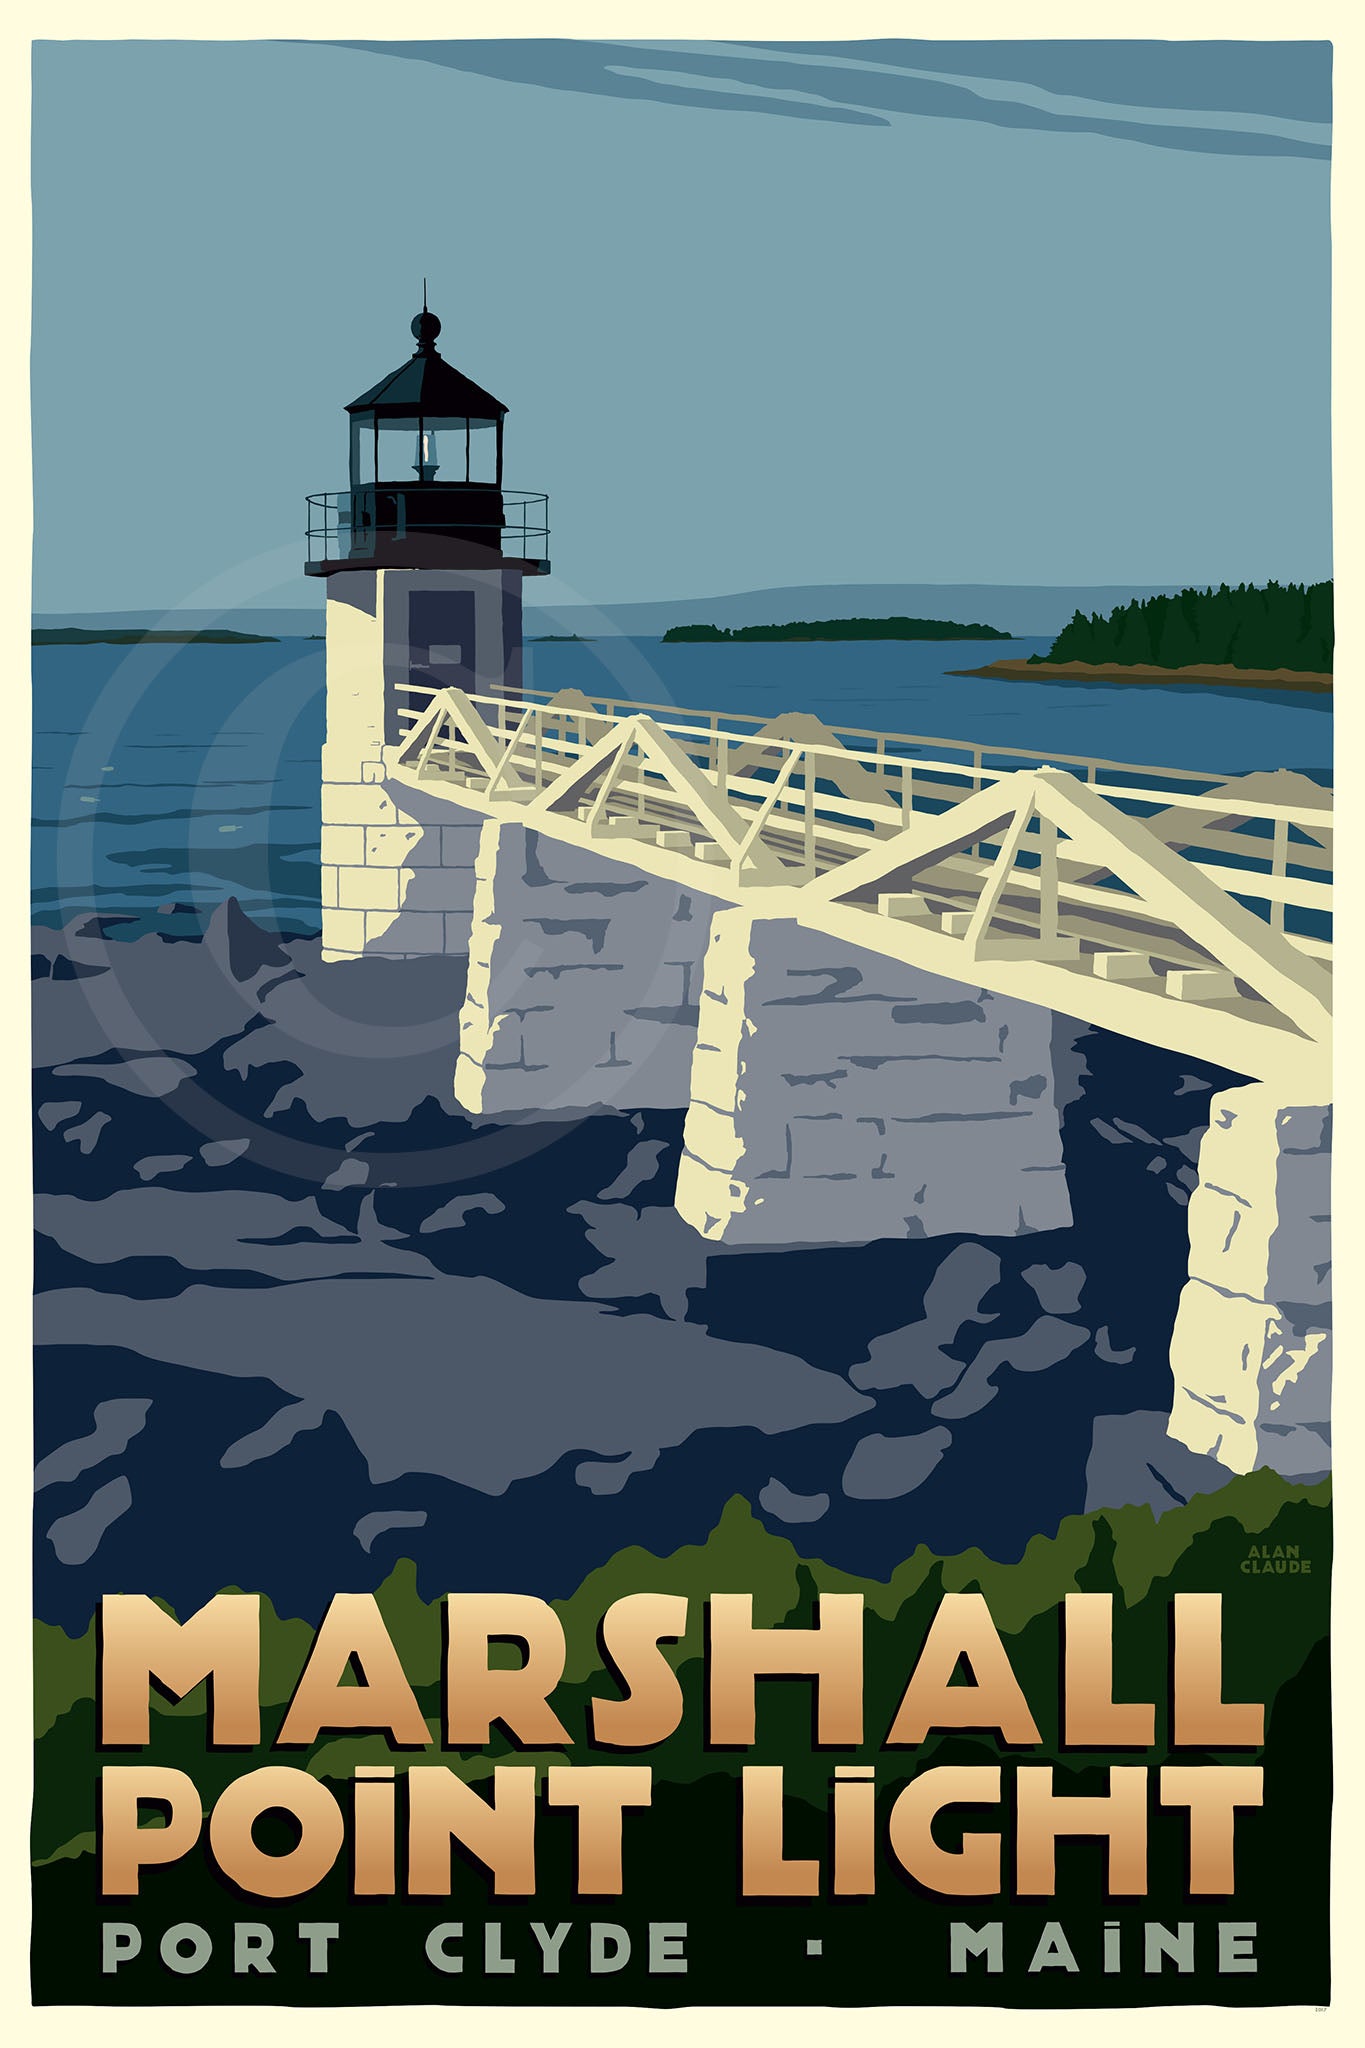 Marshall Point Light Art Print 24" x 36" Travel Poster By Alan Claude - Maine